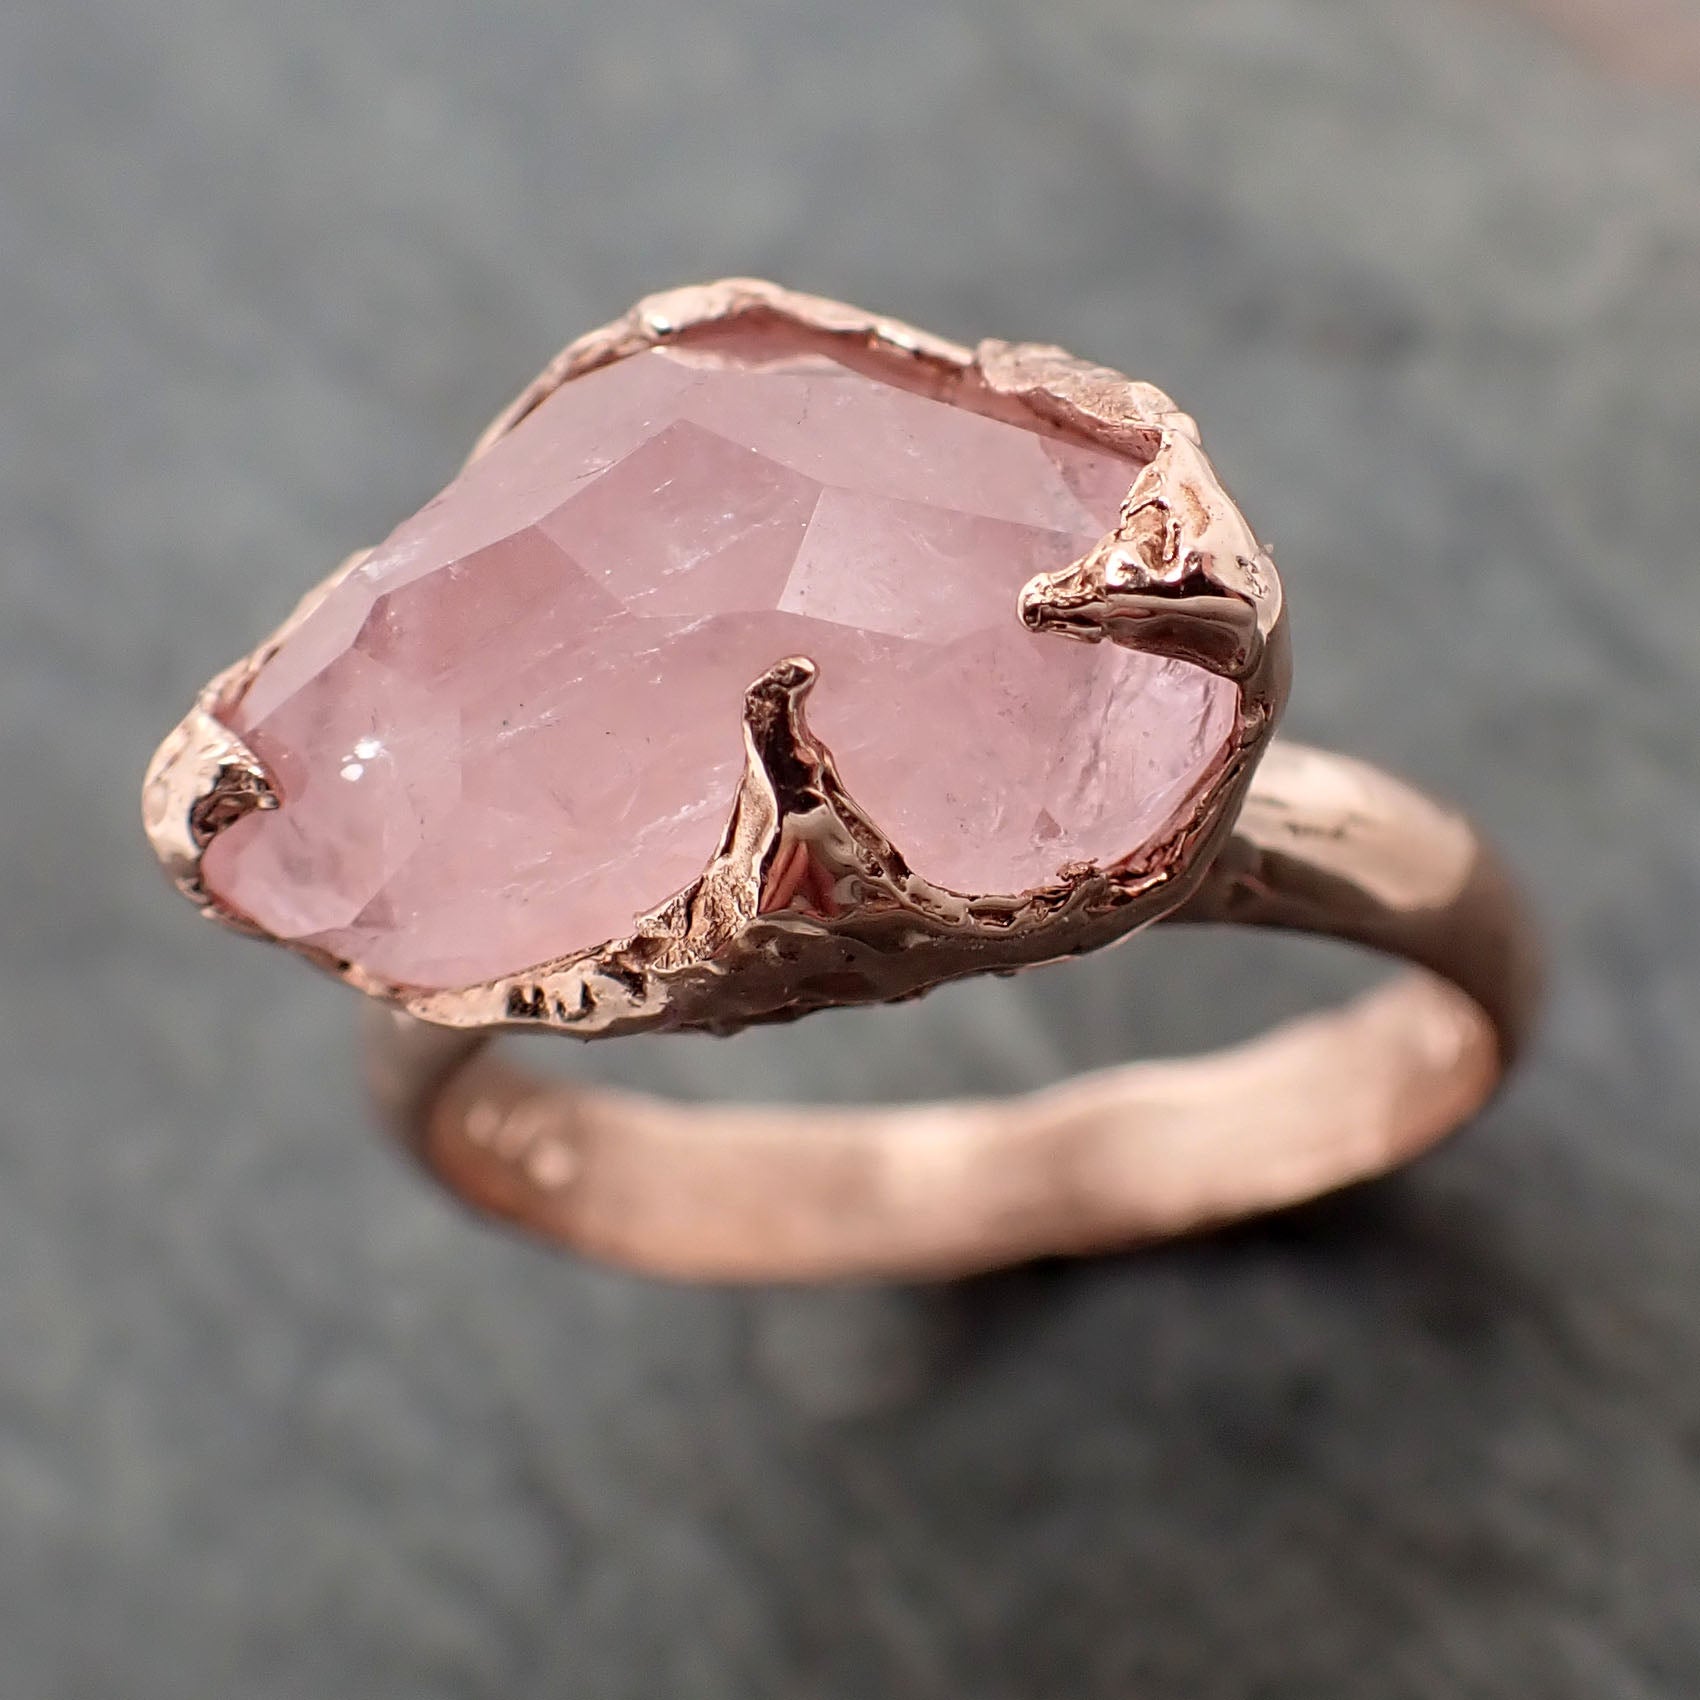 Morganite partially faceted 14k Rose gold solitaire Pink Gemstone Cocktail Ring Statement Ring gemstone Jewelry by Angeline 2346